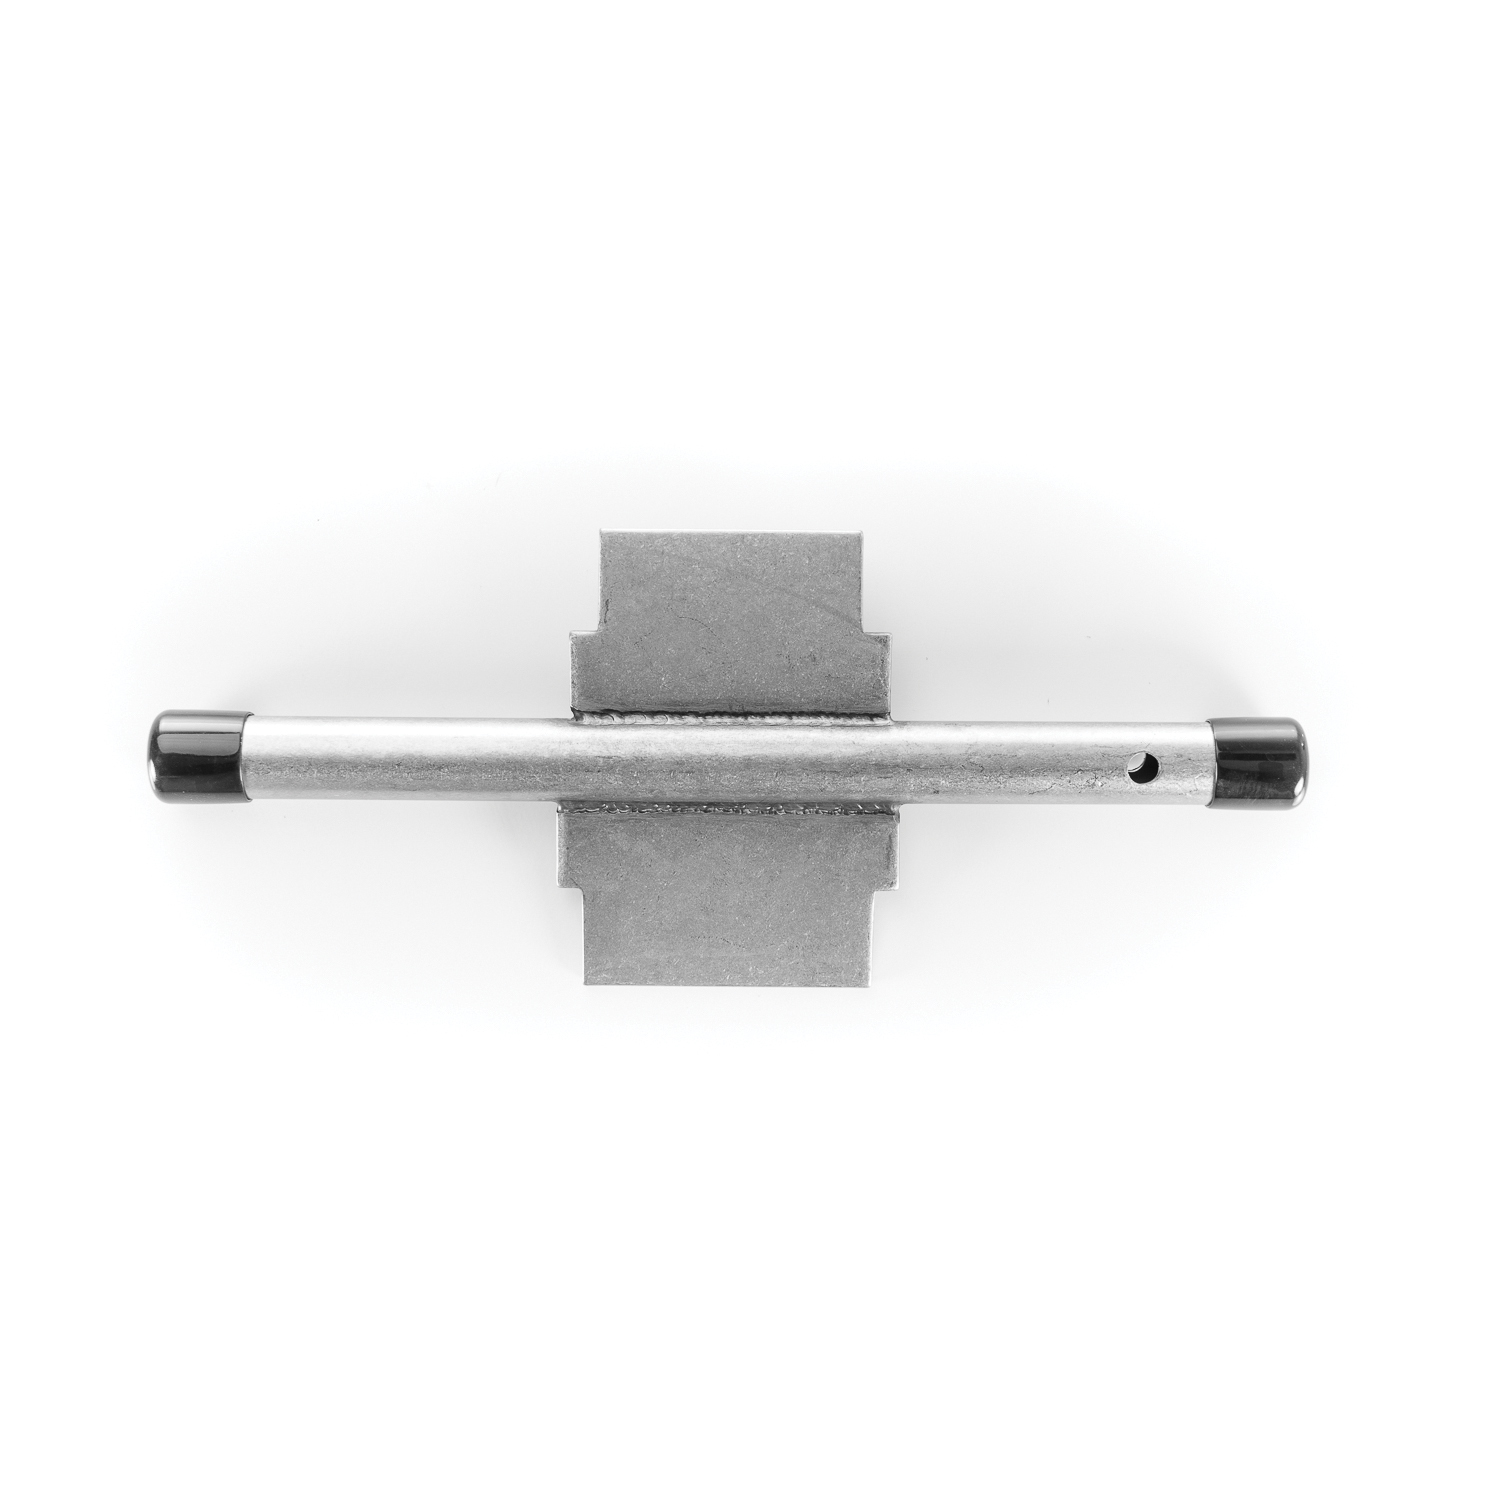 PASCO 7093 Sink Drain Tool, For Use With 3 and 3-1/2 in Drain, 304 Stainless Steel